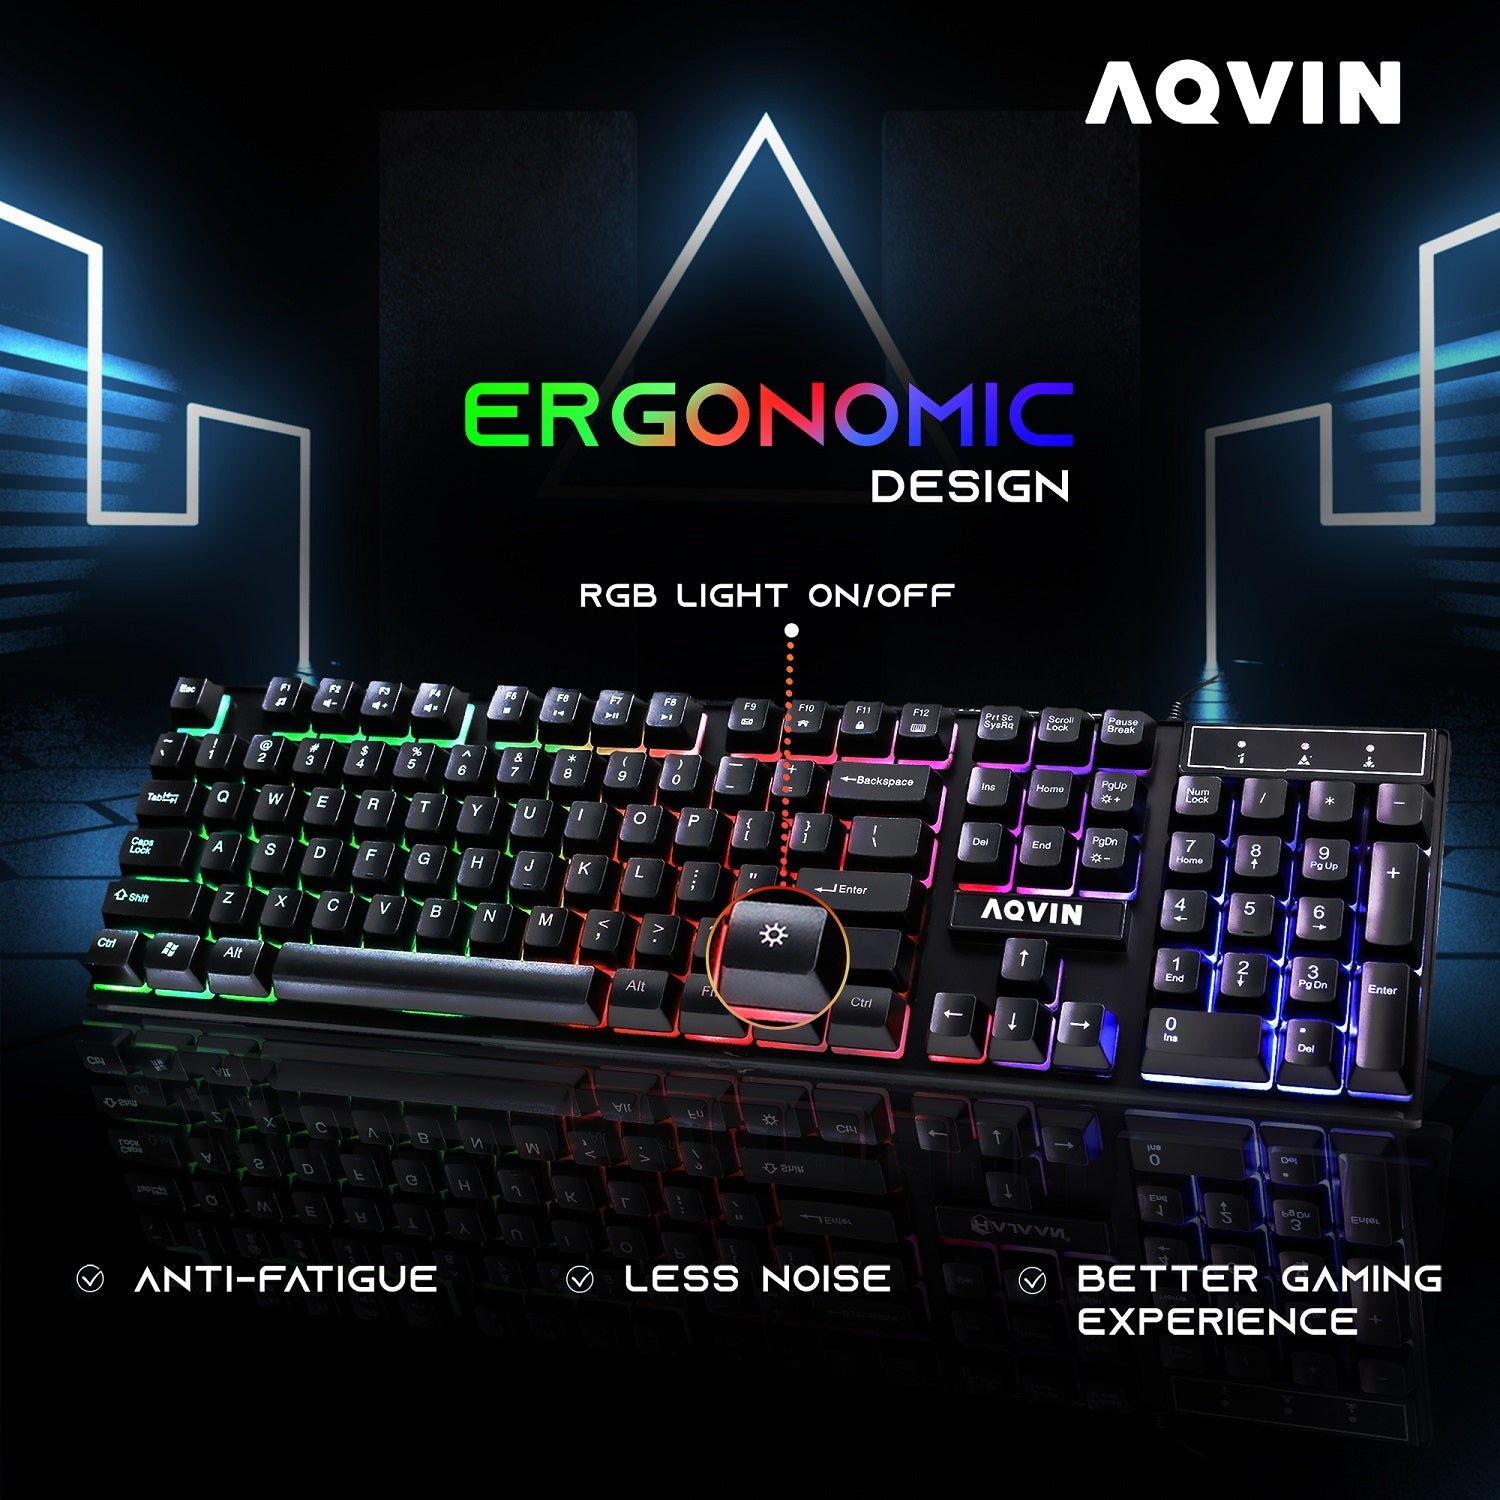 AQVIN AQW70 Gaming Desktop Computer PC Tower - New 27 inch Curved Gaming Monitor (Intel Core i7 Processor up to 4.00 GHz/ 32GB DDR4 RAM/ 1TB - 2TB SSD/ GeForce RTX 3050, 3060 Graphics Card/ Windows 10 Pro) WiFi Ready